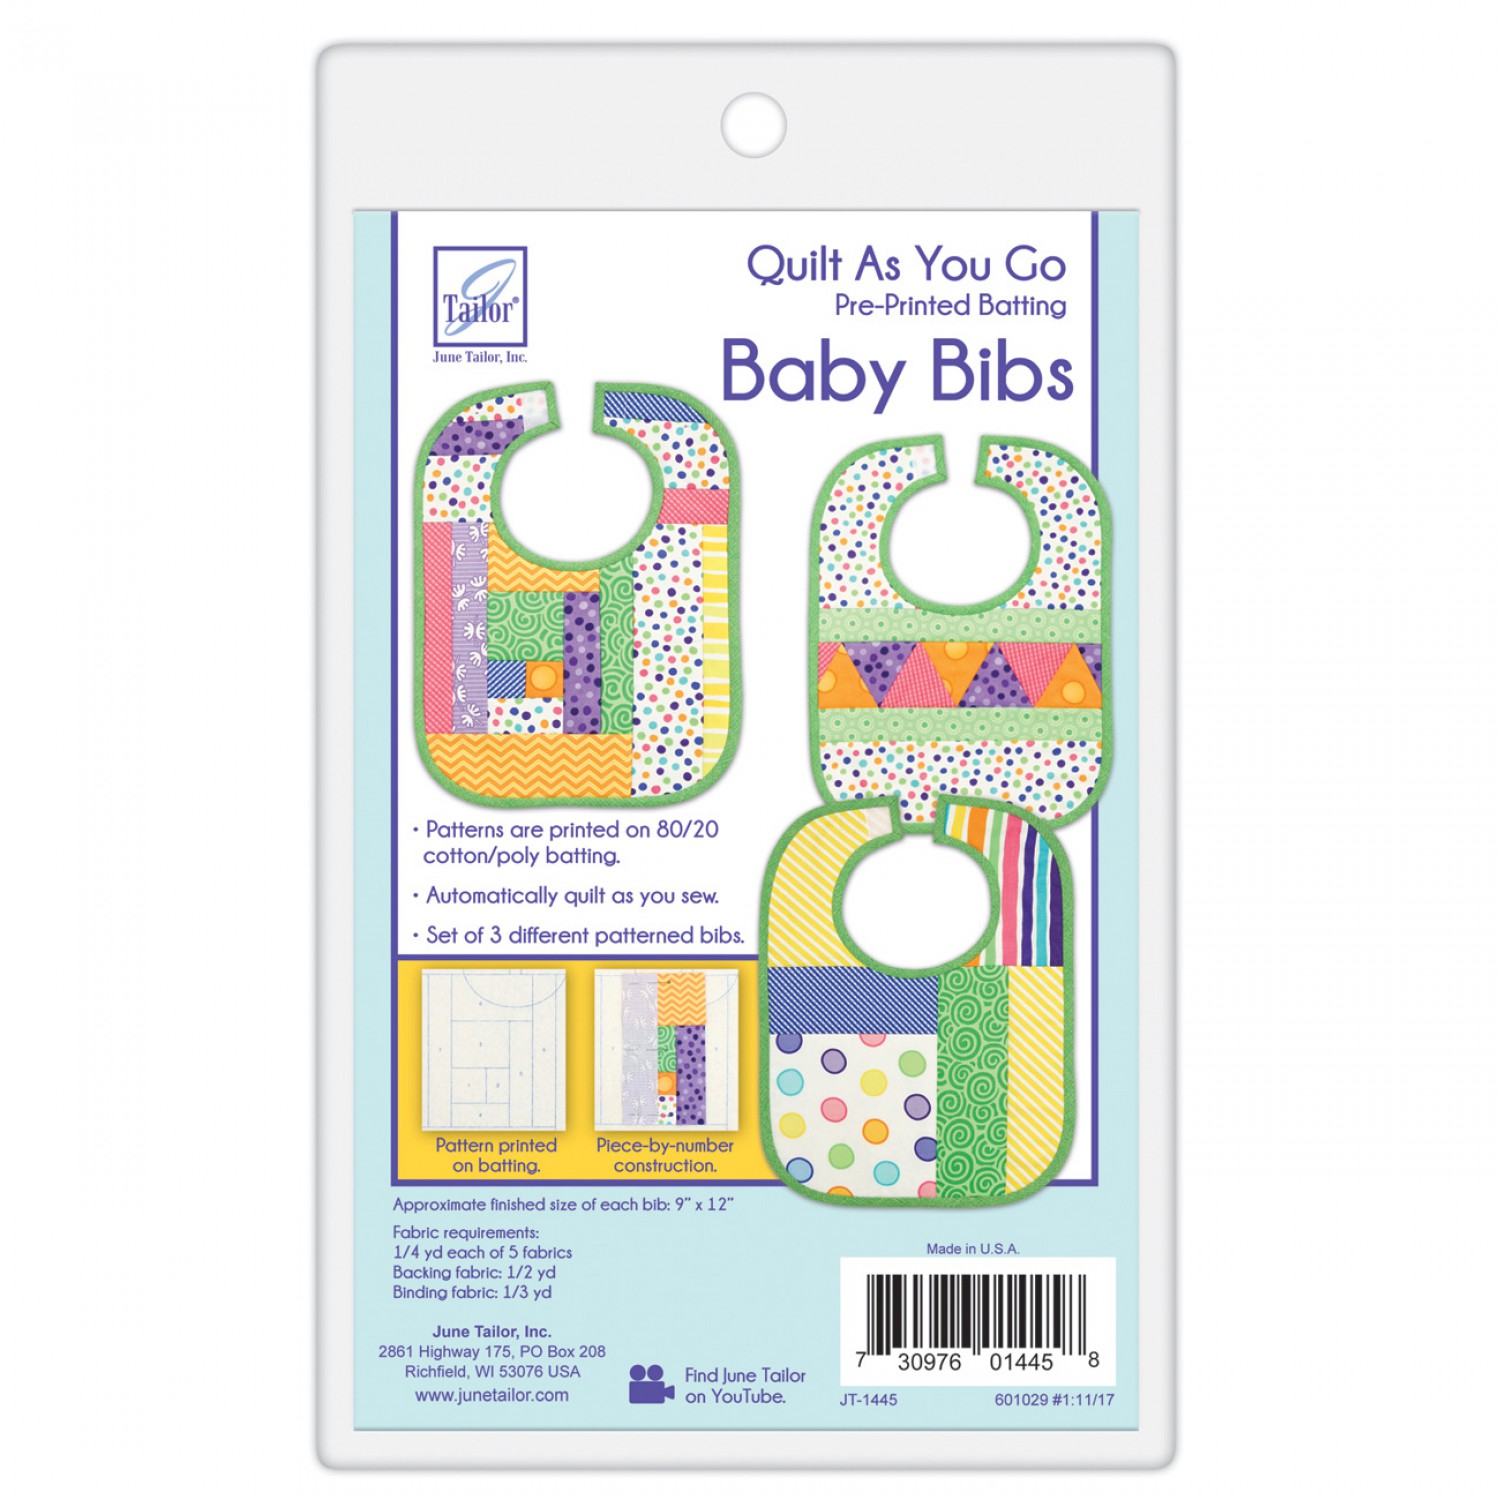 June Tailor - Quilt As You Go Baby Bibs - Patterns printed on cotton/poly batting - Set of 3 different patterned baby bibs